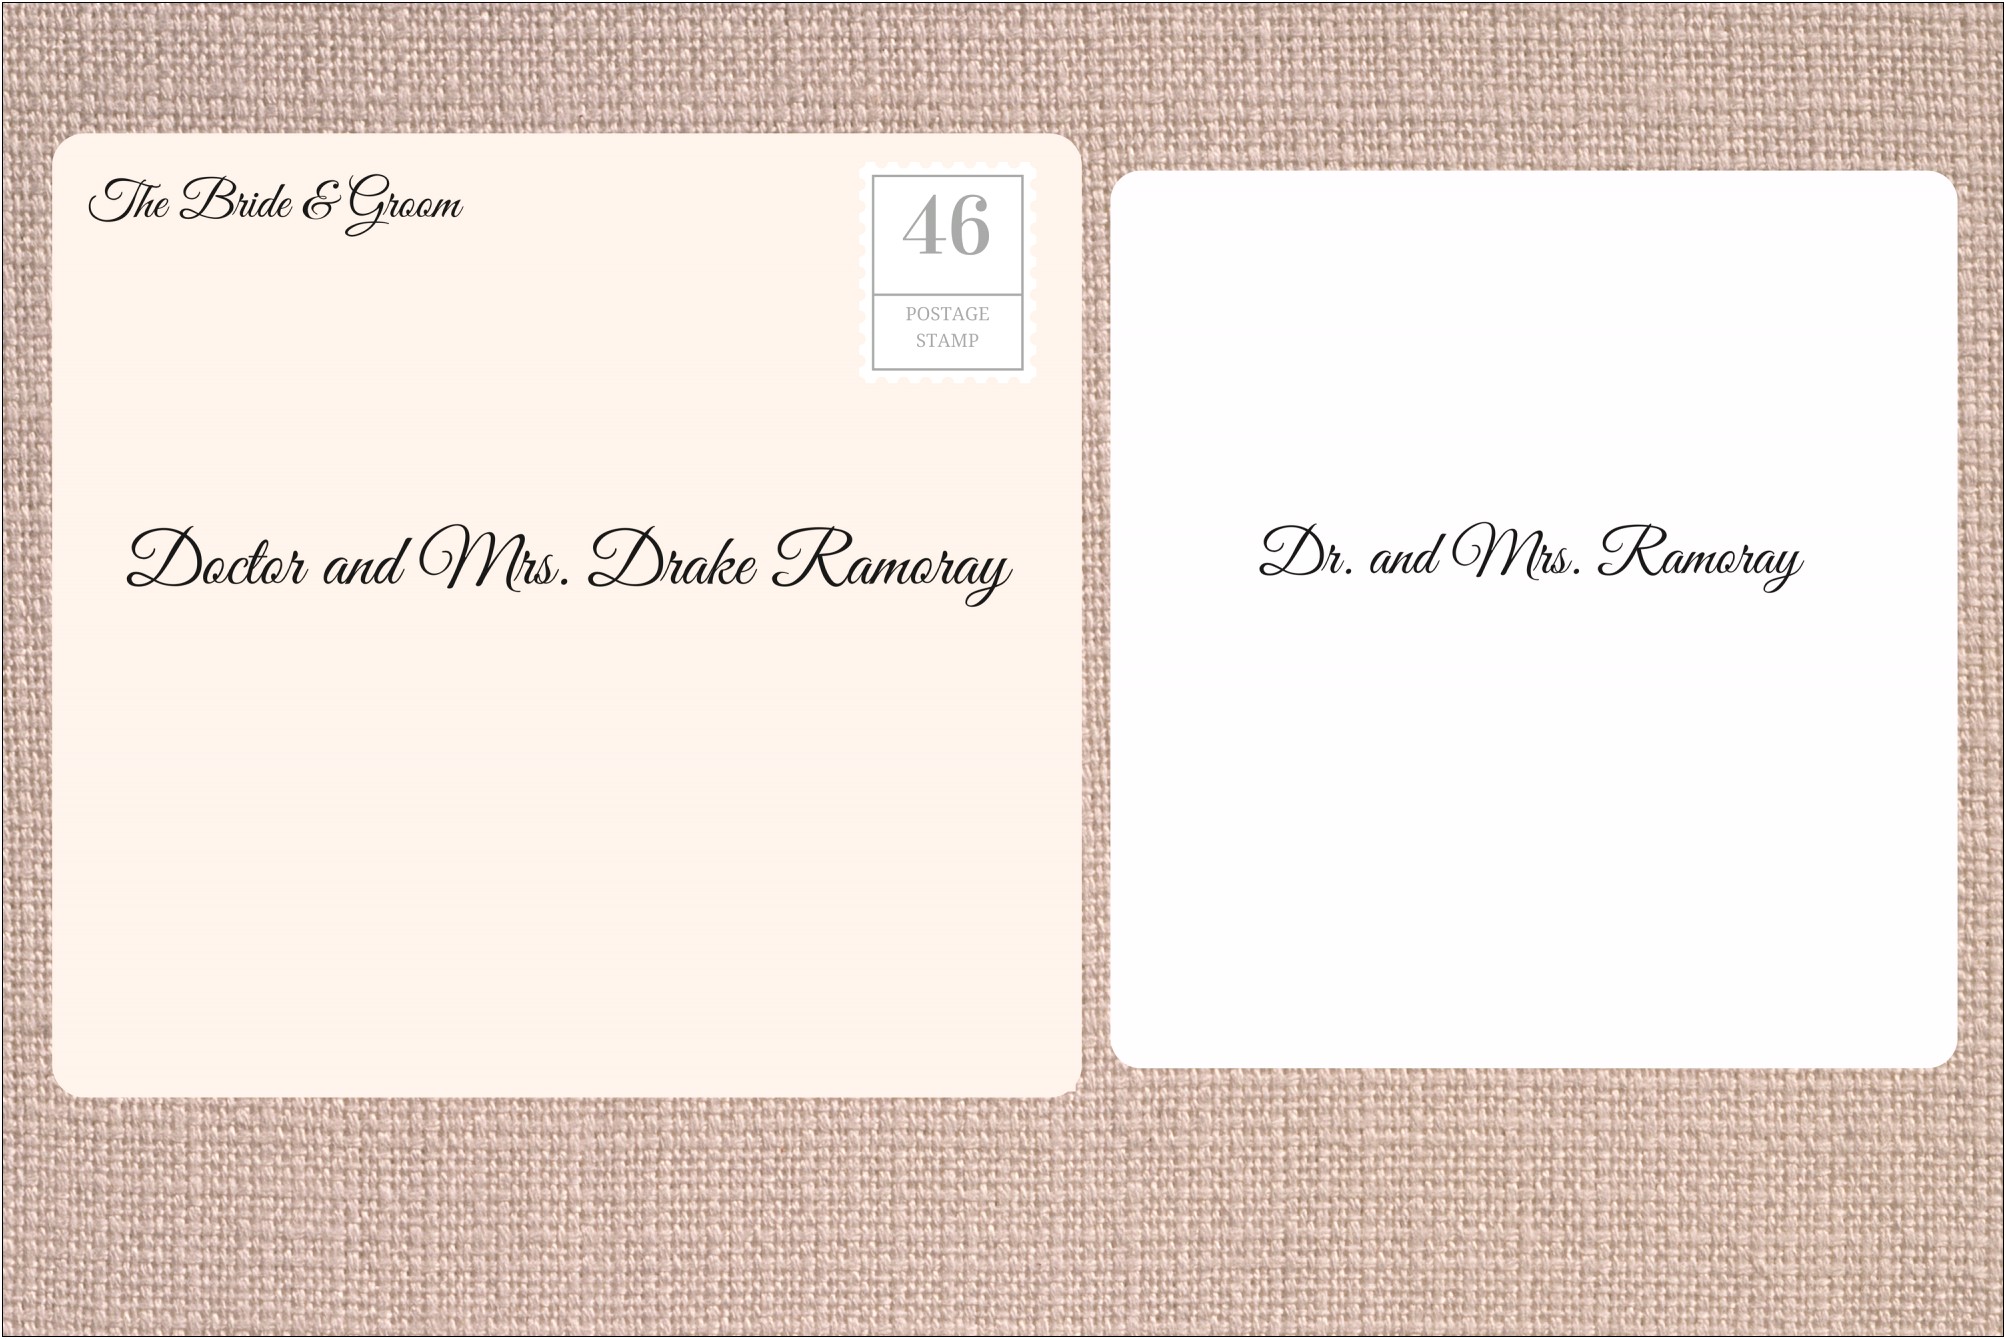 Addressing Wedding Invitations To Doctor And Wife